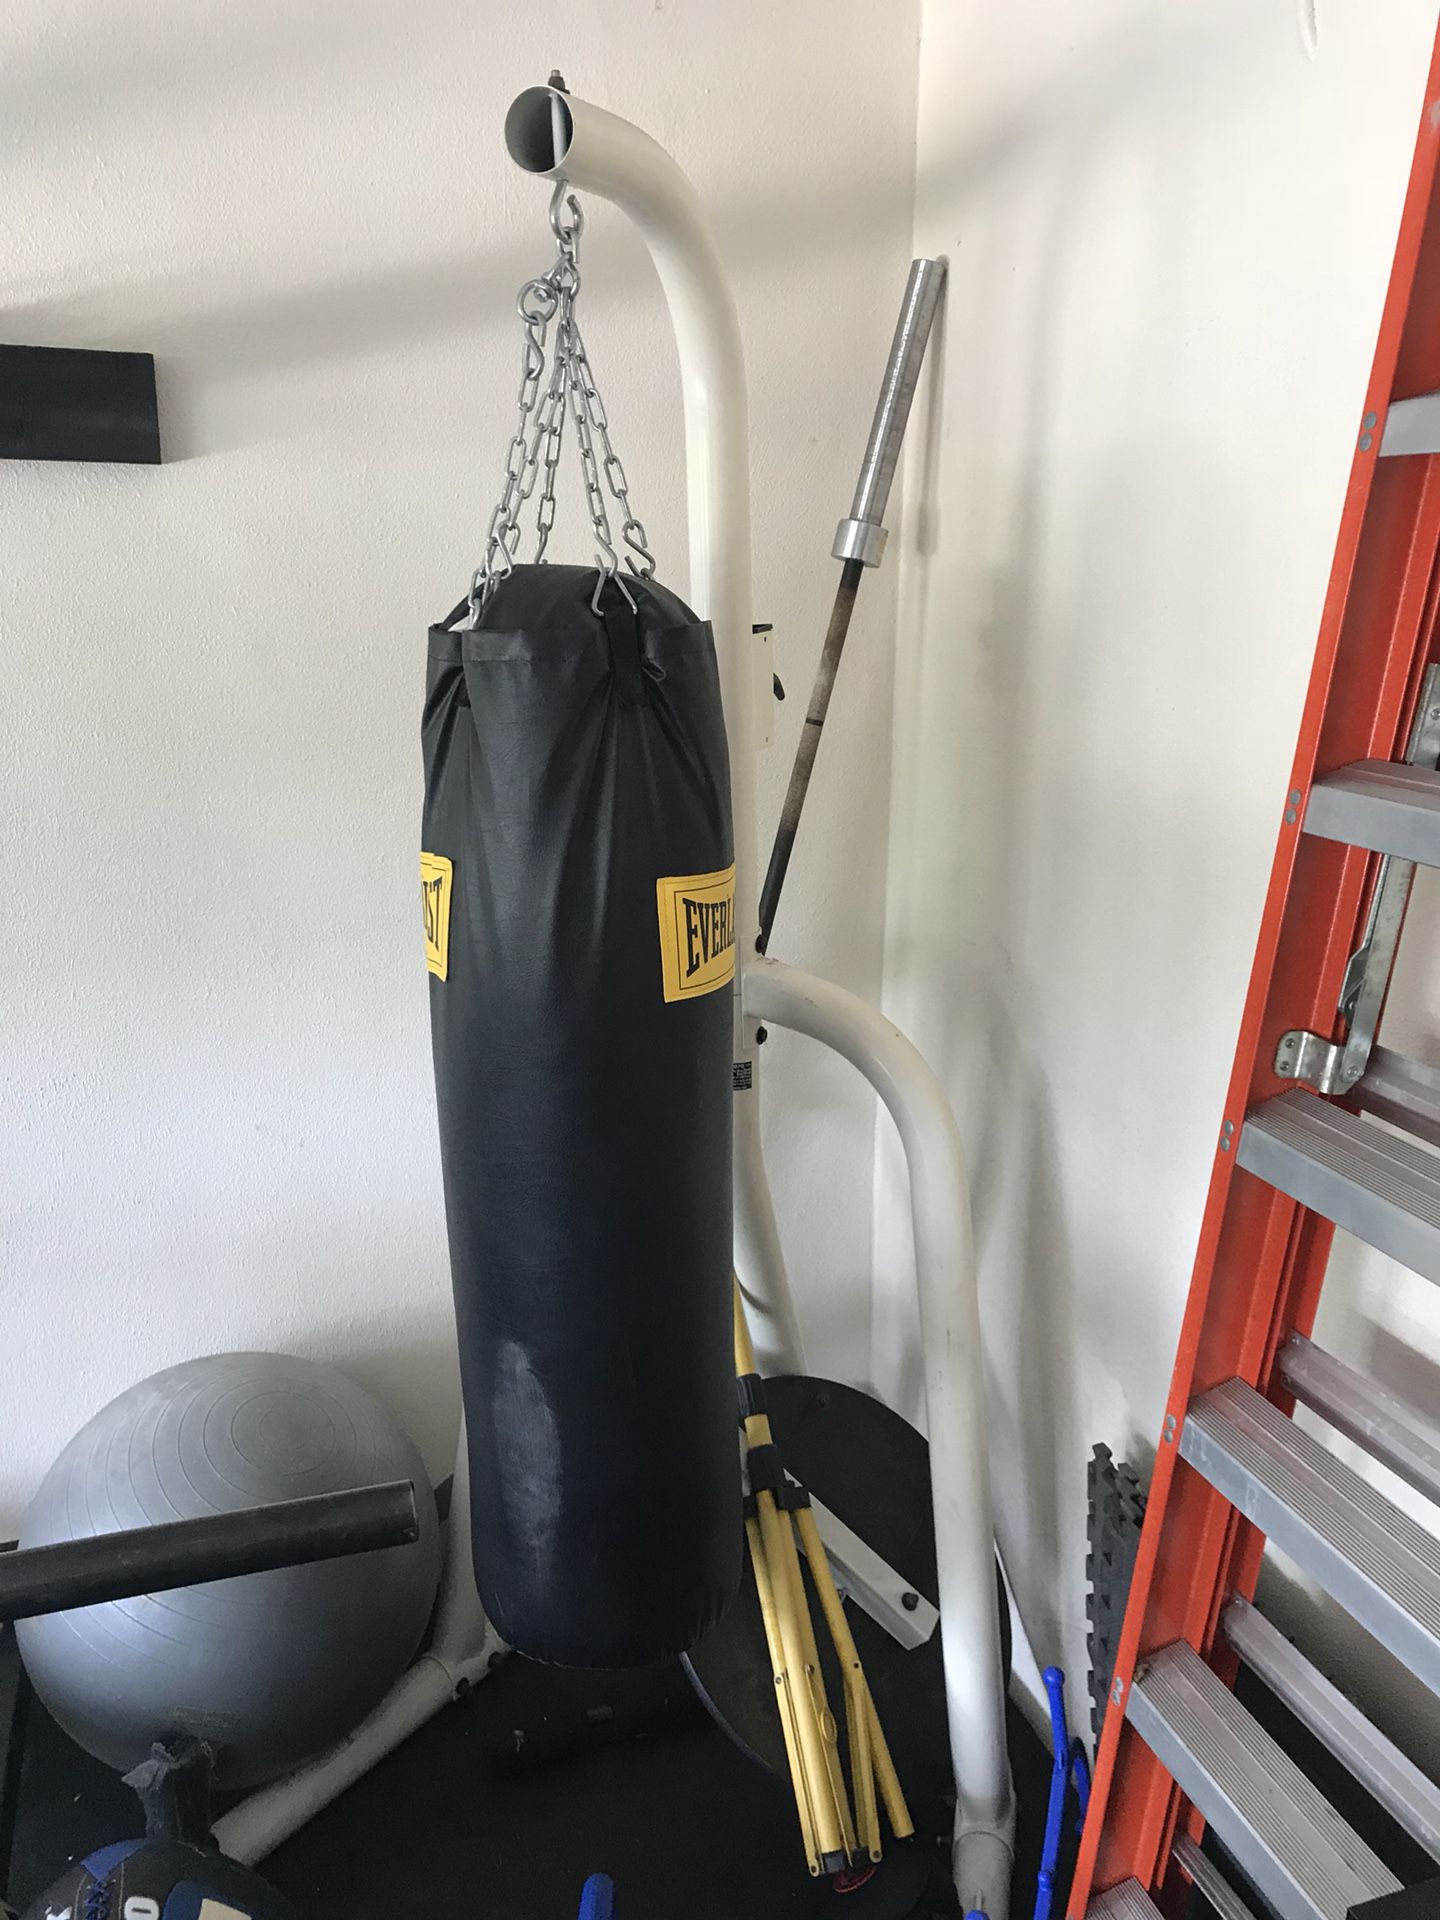 100lb Everlast bag with stand and speed bag attachment. Barely used....$135